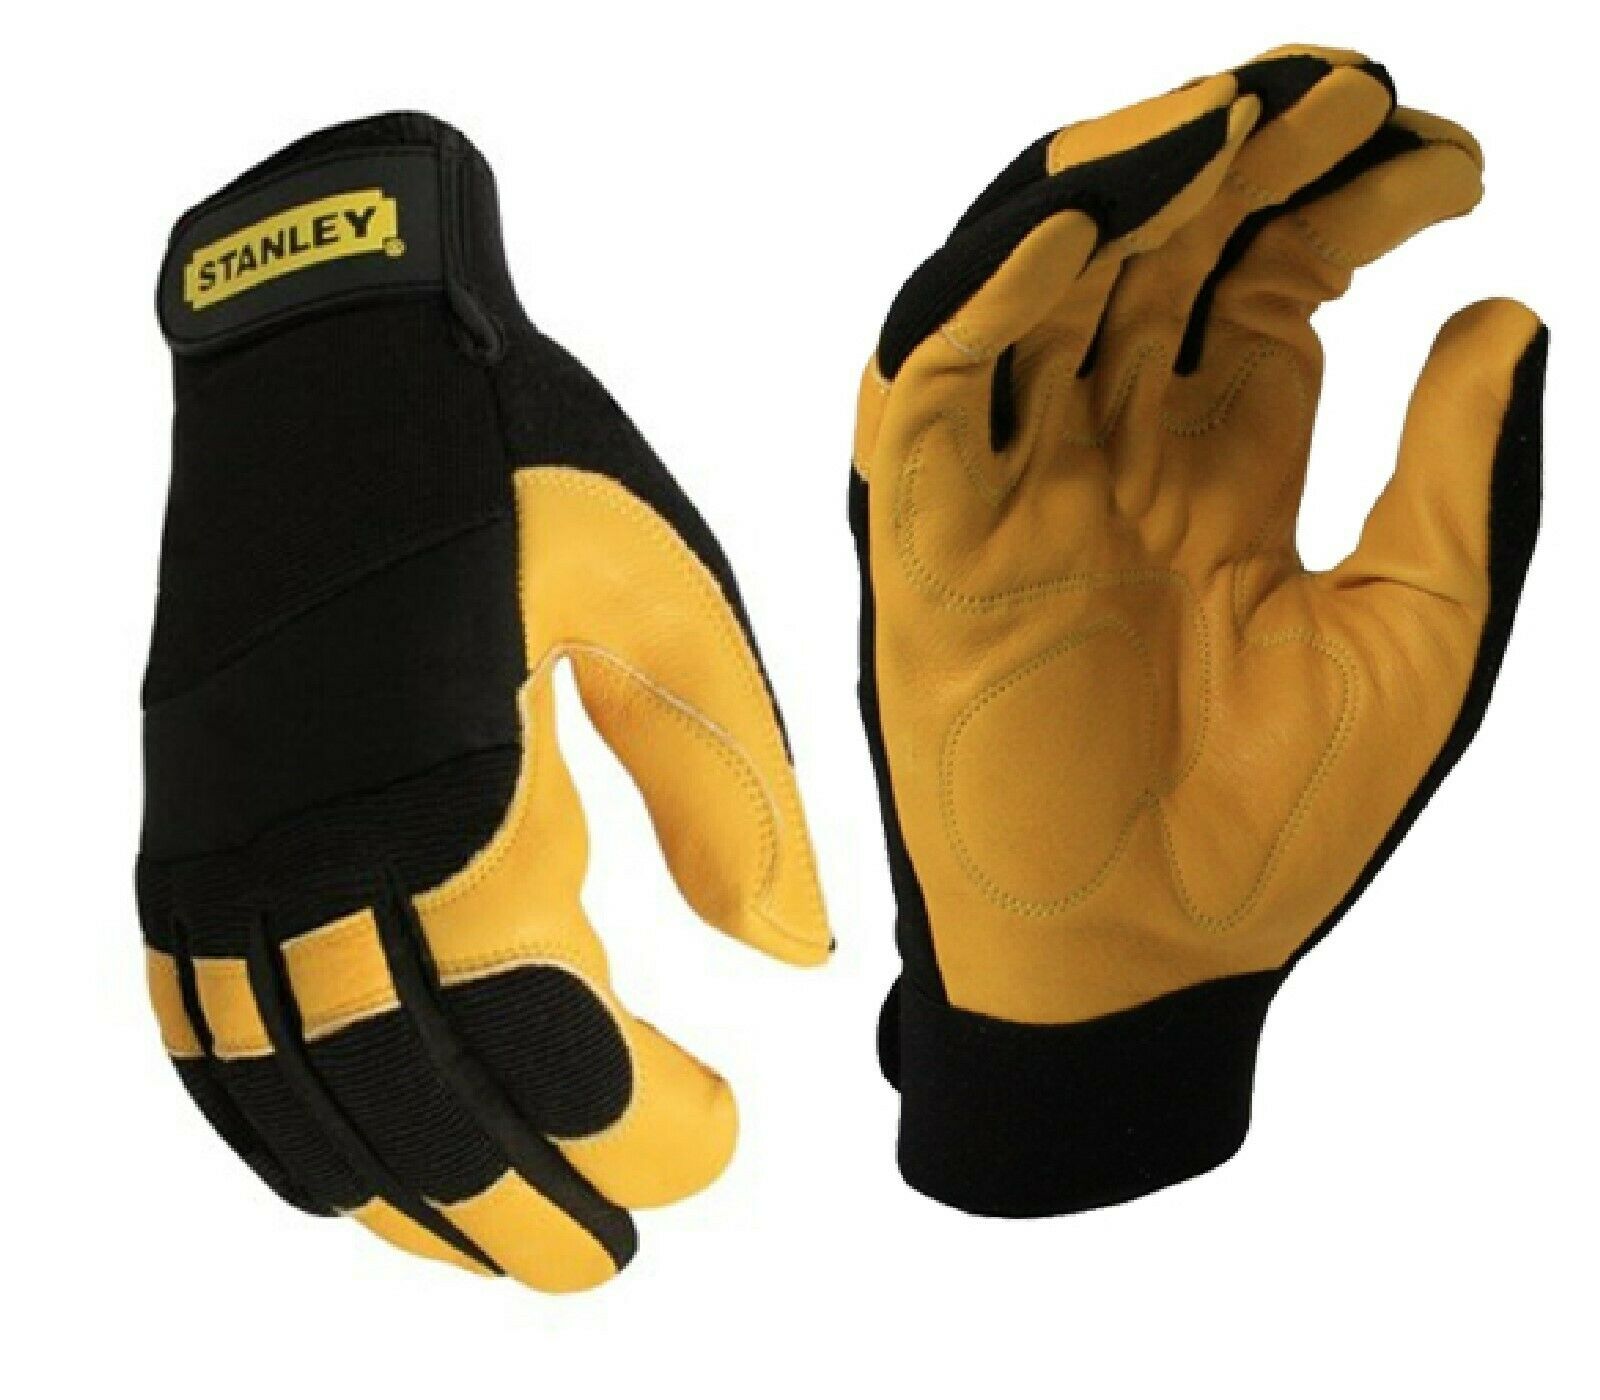 STANLEY SY750L EU LEATHER PERFORMANCE DRIVER GLOVES LARGE